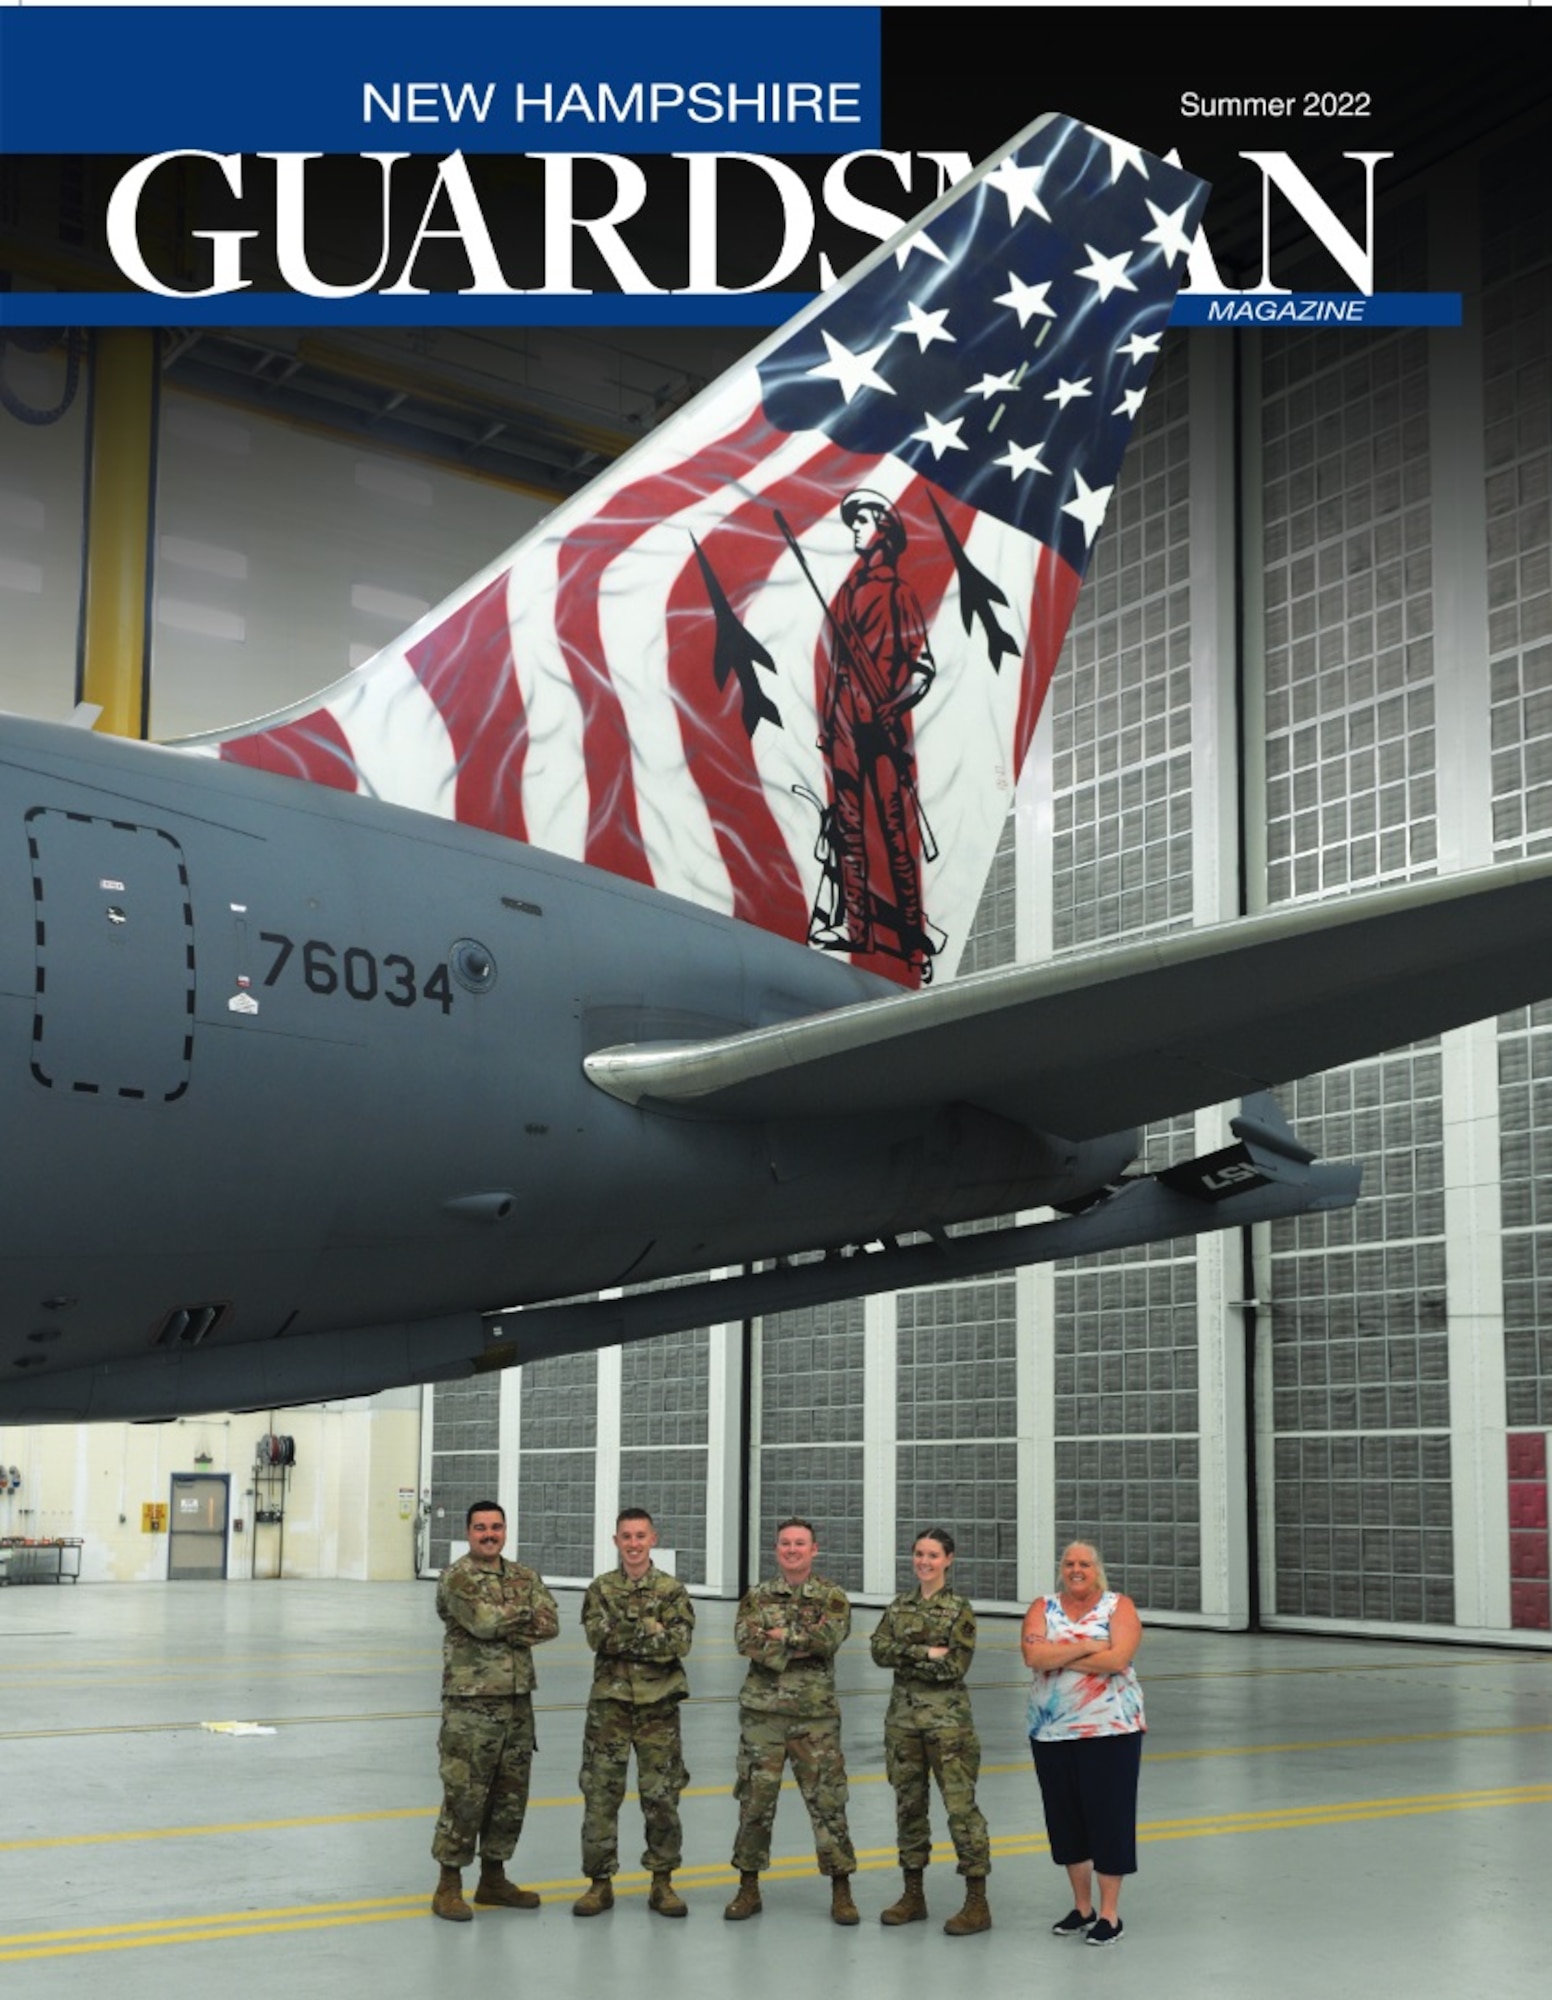 The 2022 summer issue of New Hampshire Guardsman features a patriotic paint job for the "Spirit of Portsmouth" KC-46A Pegasus in Alaska; Innovative Readiness Training mission in Cherokee Nation; Cabo Verdean minister of defense's New Hampshire visit; state military reservation's Heritage Room dedication ceremony in memory of Medal of Honor recipient, Capt. Harl Pease Jr.; NHNG leadership trip to El Salvador; Officer Candidate School training in Center Strafford; search and rescue training in Pembroke; chief of National Guard Bureau's visit to Pease ANG Base; Brig. Gen. John Pogorek and Col. Nelson Perron promotions; Ranger assessments; and Winston P. Wilson national marksmanship matches in Arkansas.